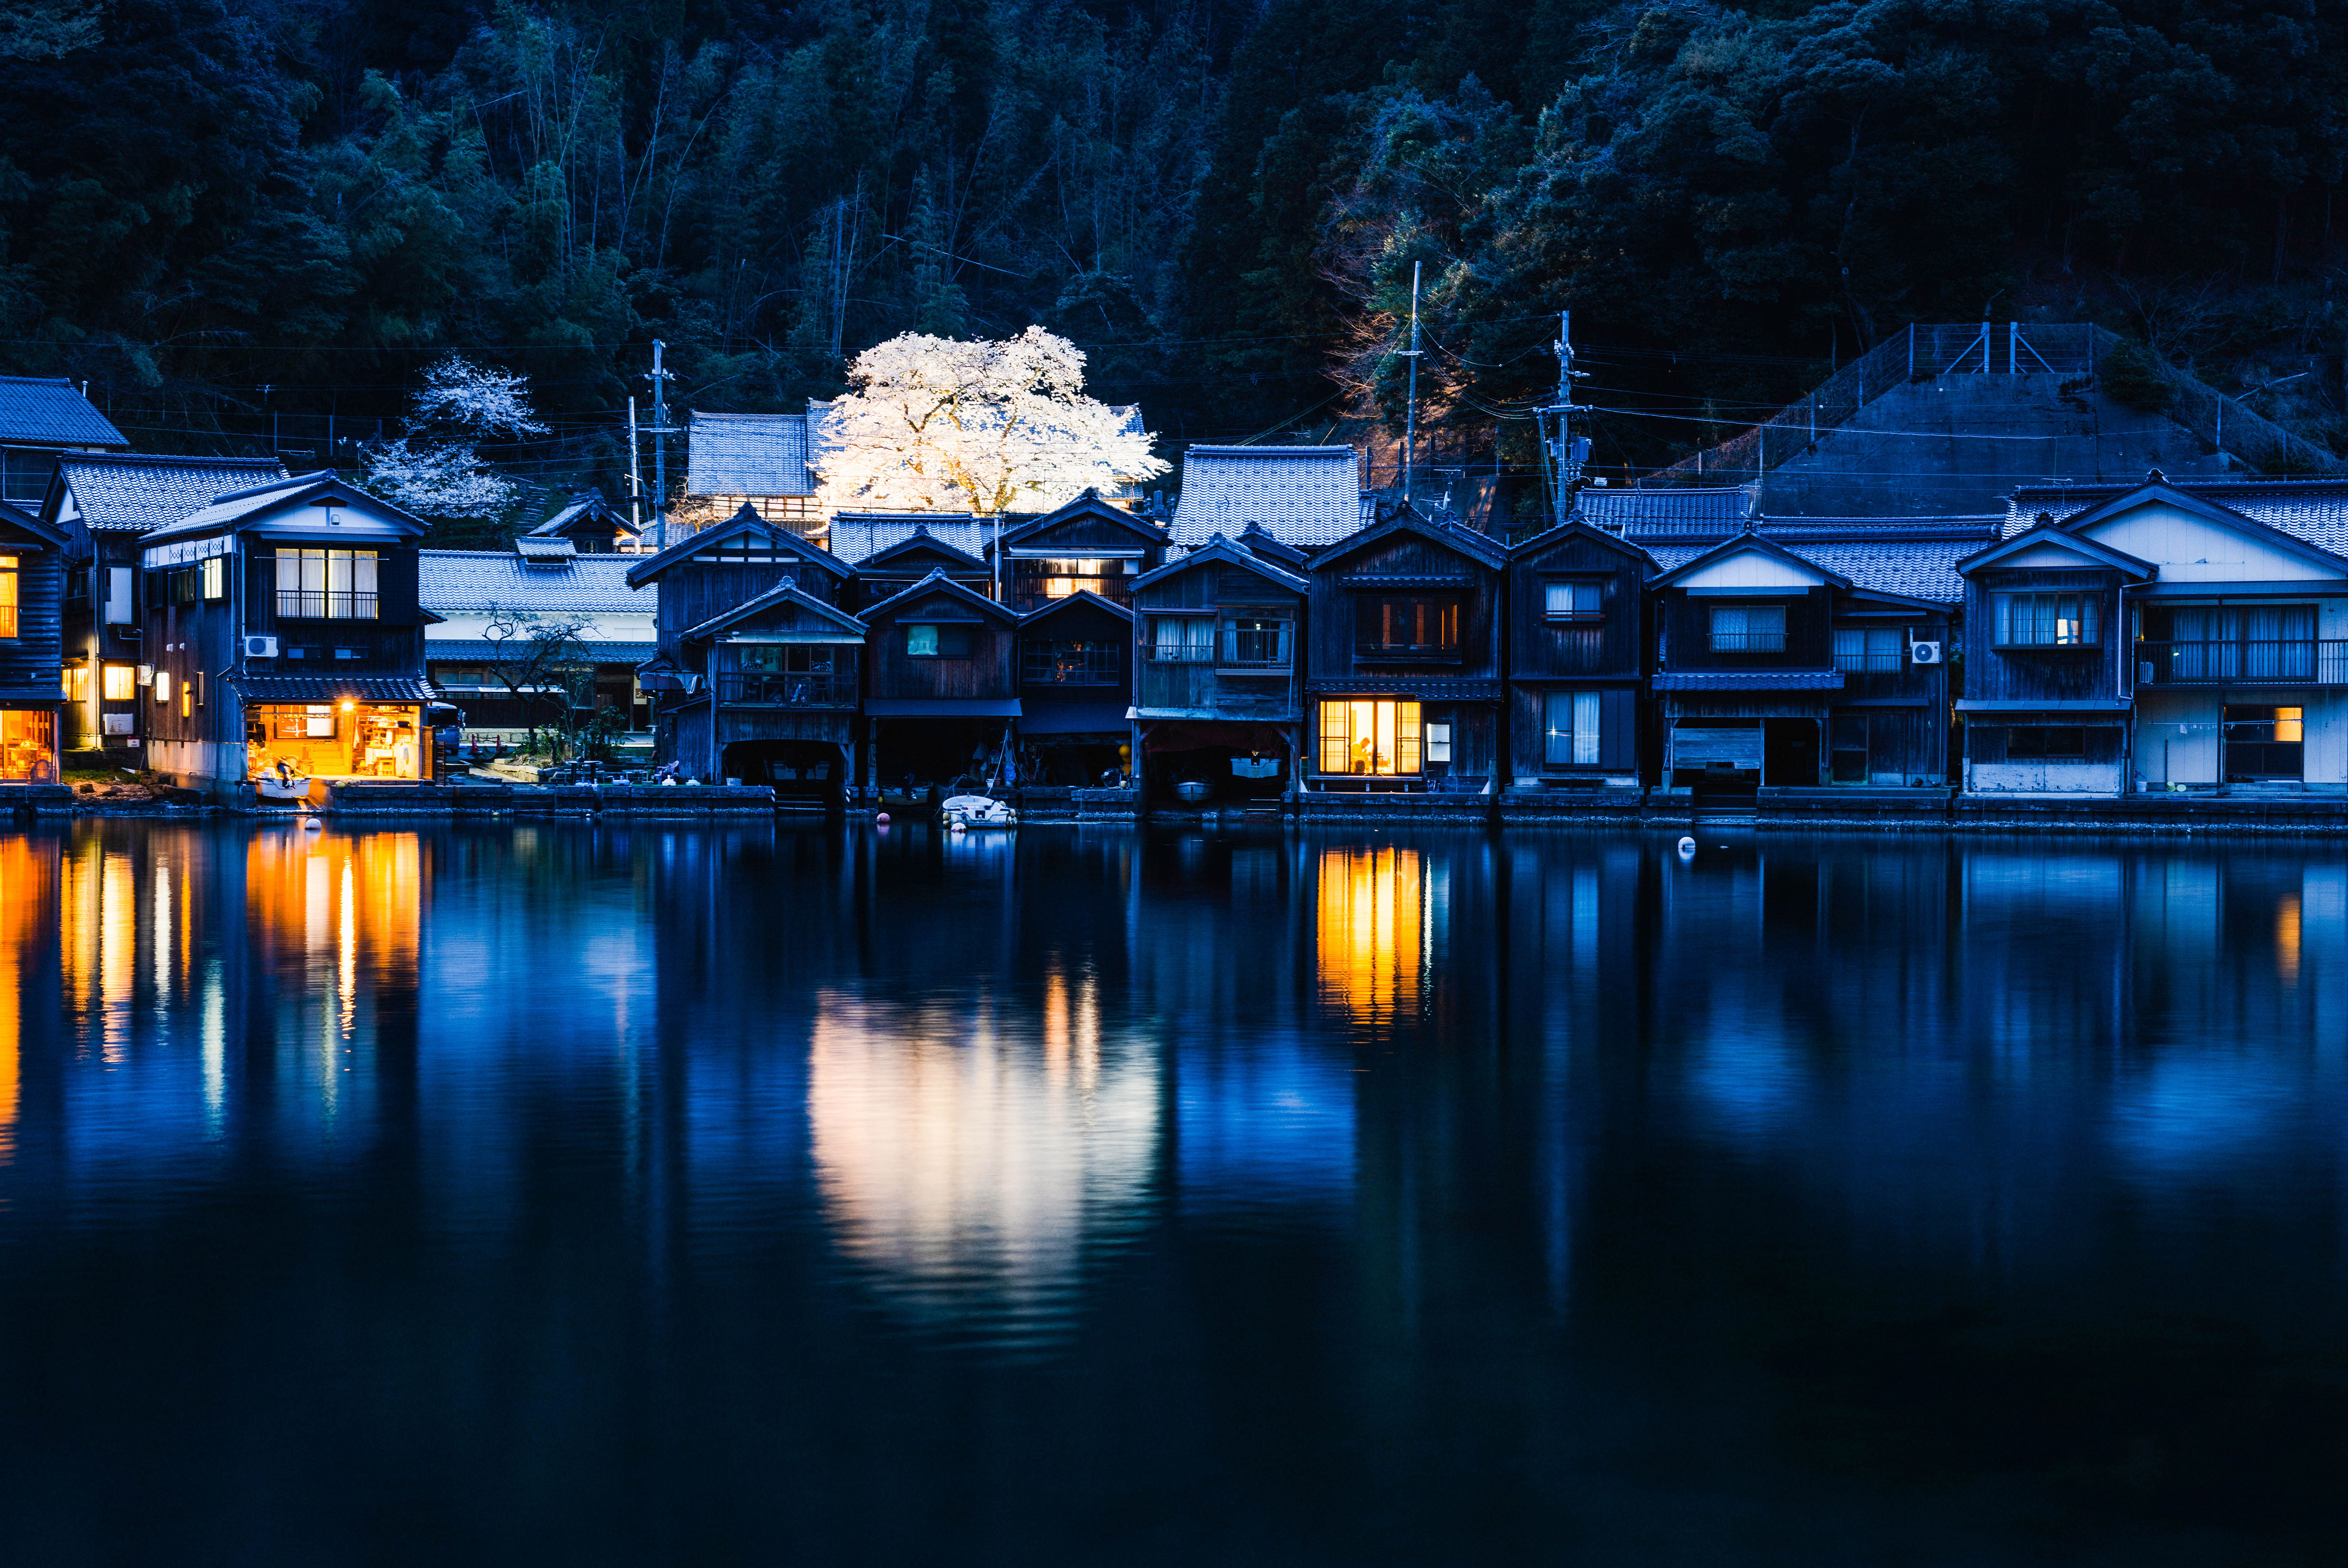 Japan Inverted Water Reflection Night Building Lights 4765x3182